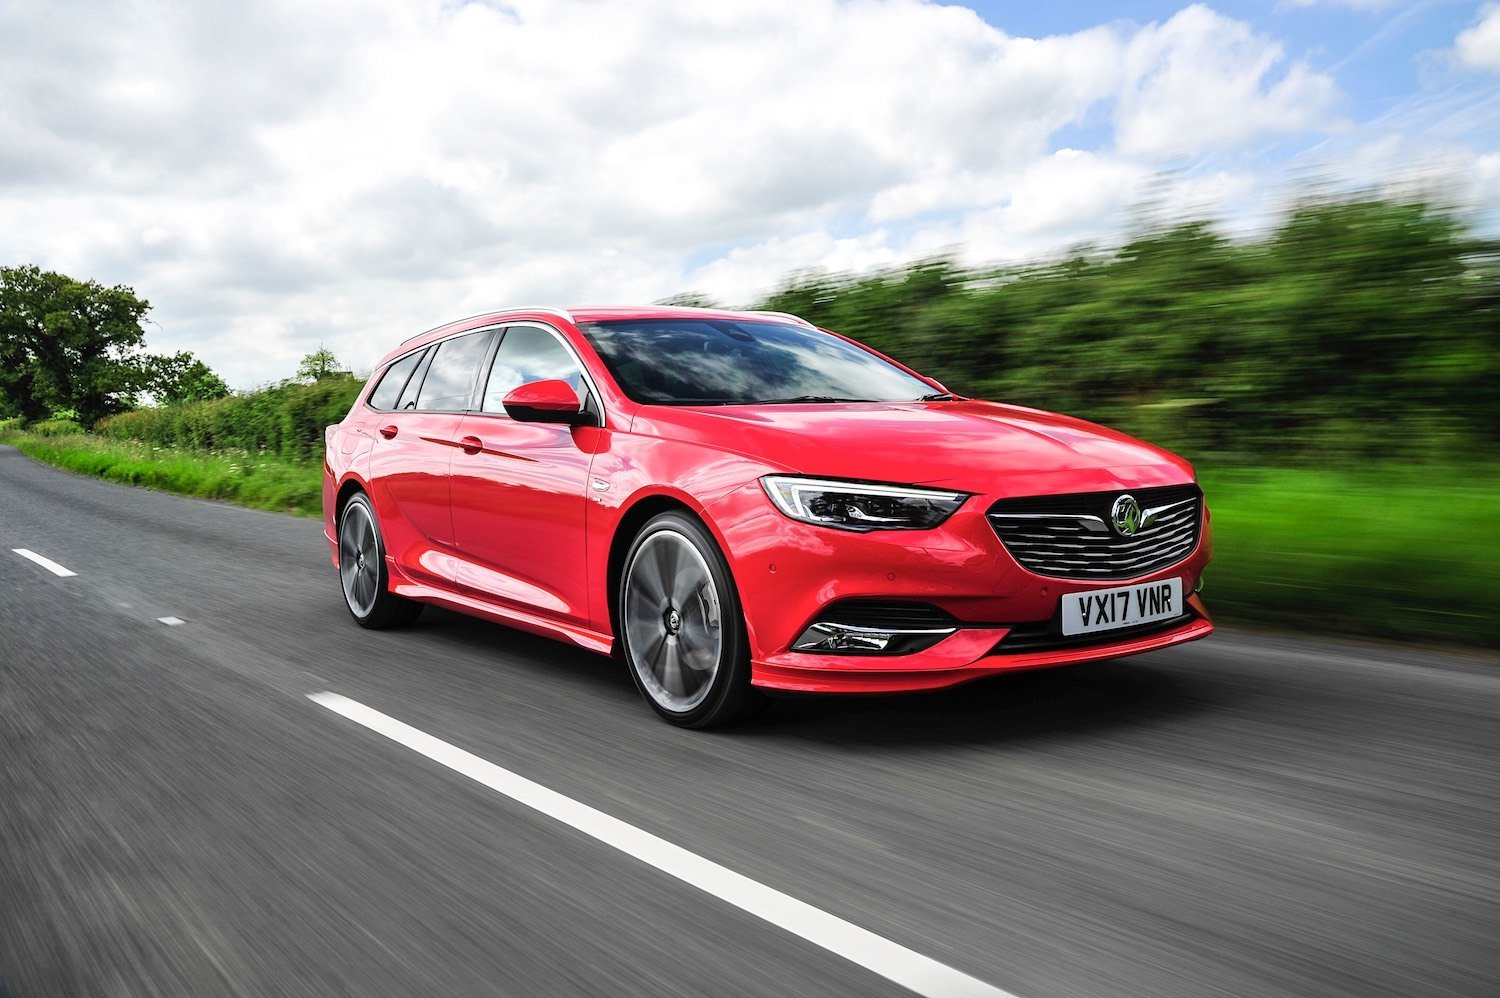 drive-Tom Scanlan Reviews the New Vauxhall Insignia Sports Tourer 2